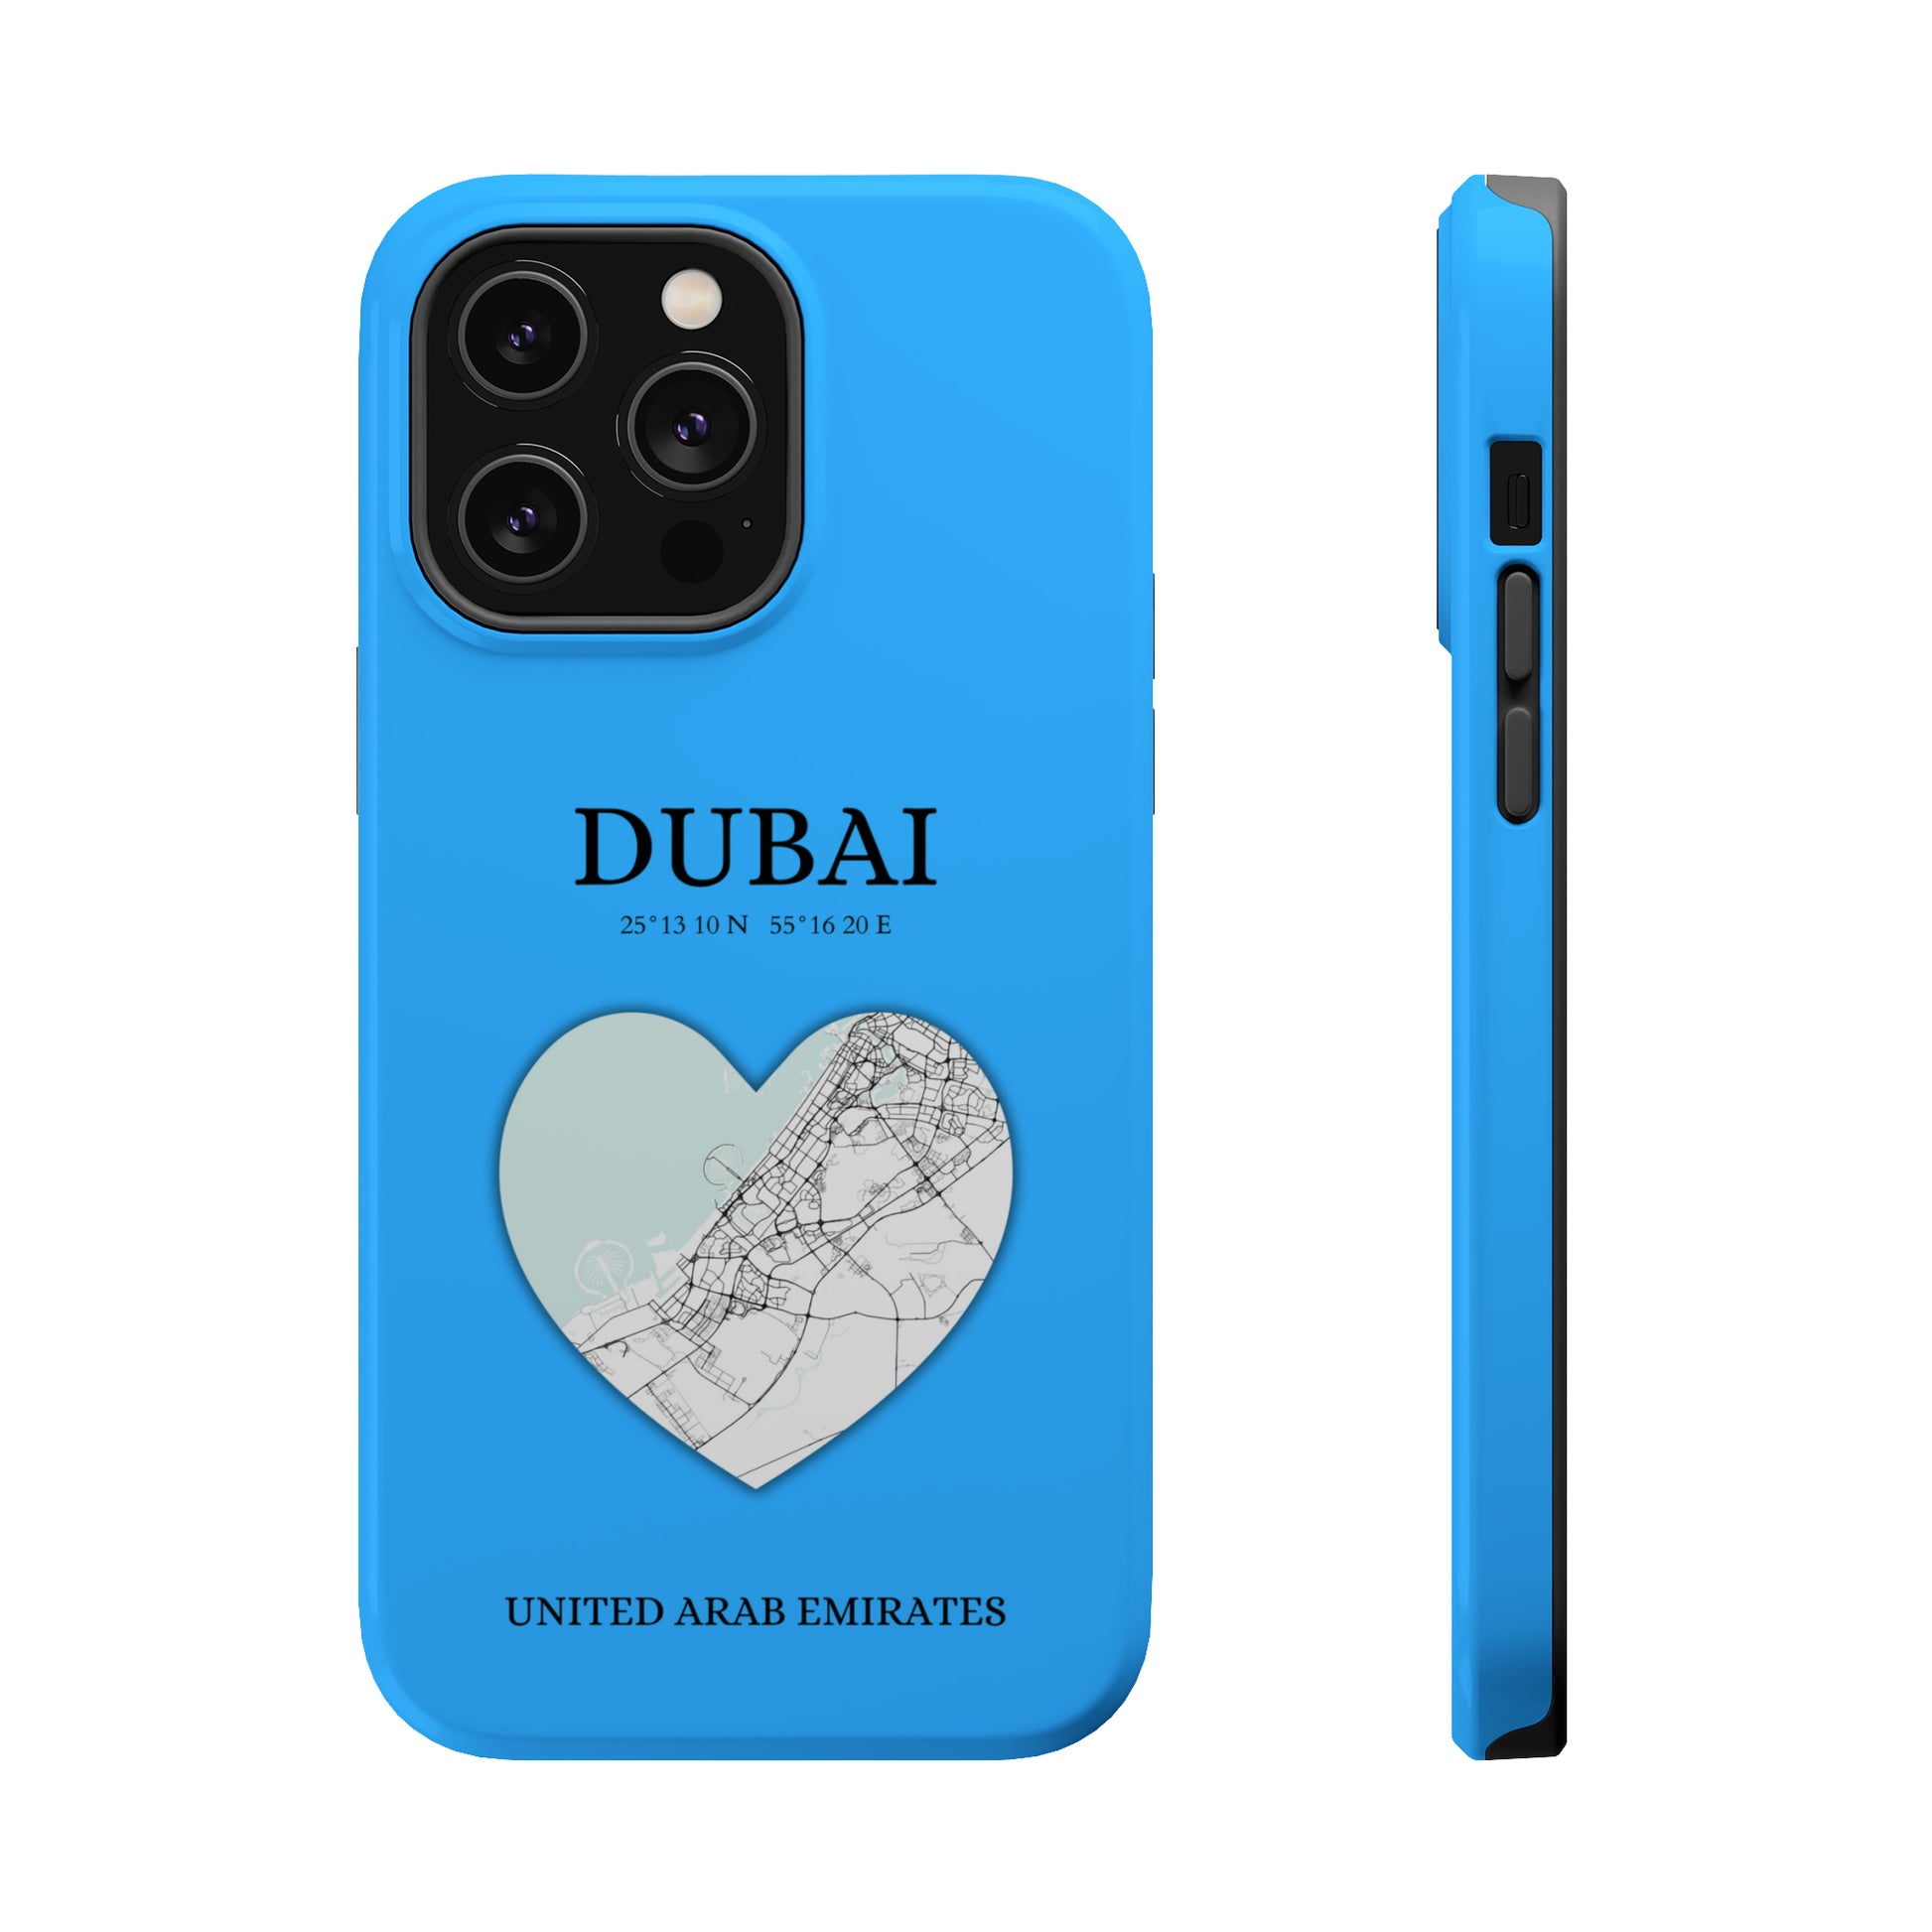 Dubai Heartbeat - Sky Blue (iPhone MagSafe Case)Elevate your iPhone's style with the Dubai Heartbeat White MagSafe Case, offering robust protection, MagSafe compatibility, and a choice of matte or glossy finish. PRimaGallery